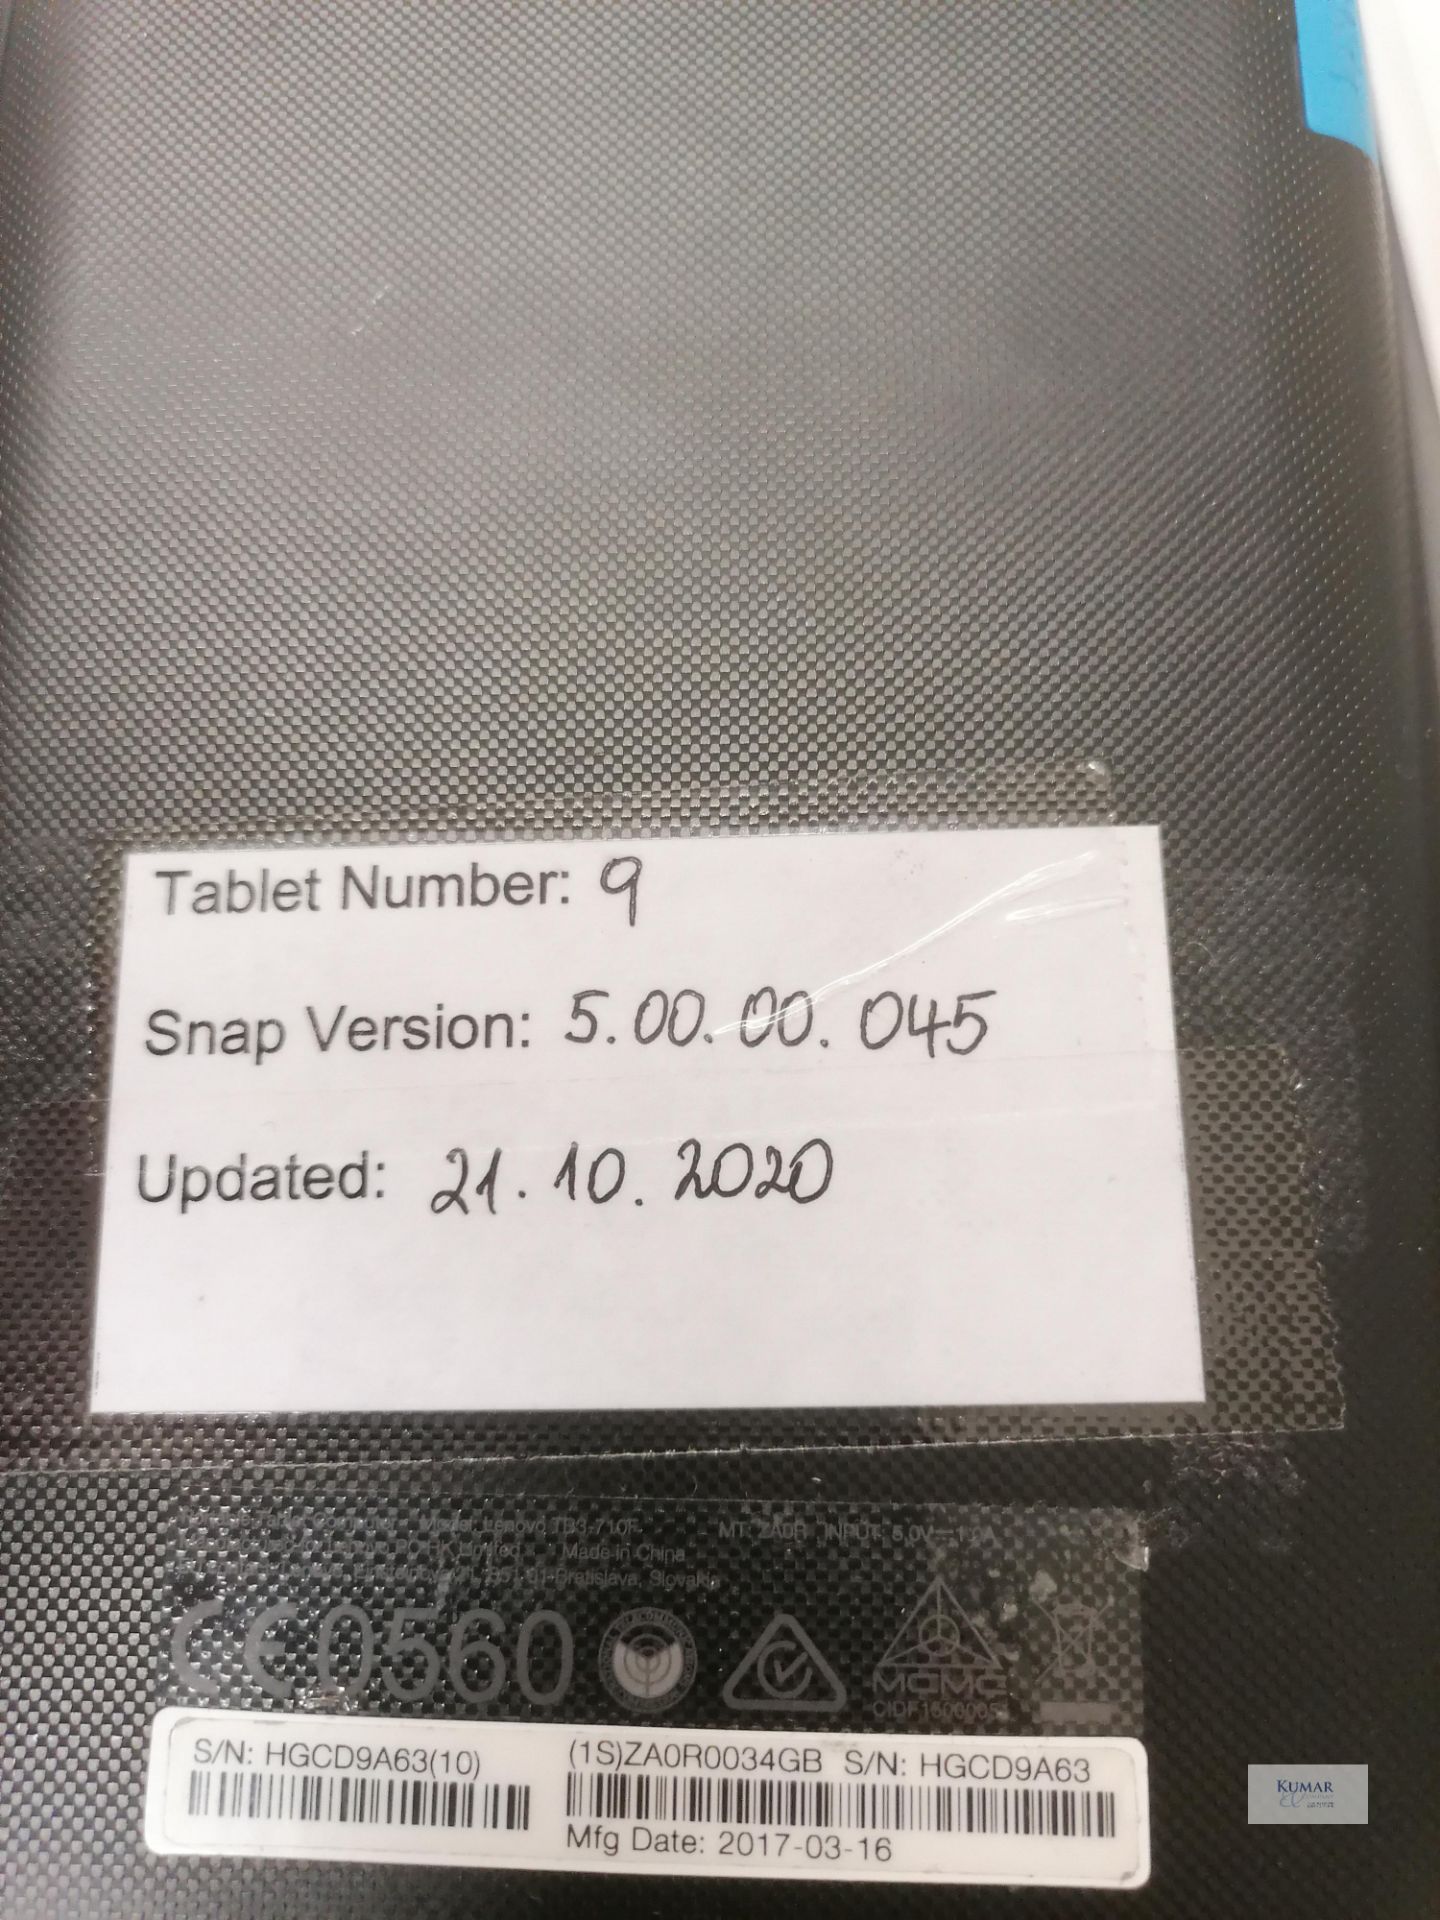 Lenovo TB3-710F 7" 16GB Table Man 16 03 2107 Updated 21 10 2020 In box,cable and charger - Image 4 of 5